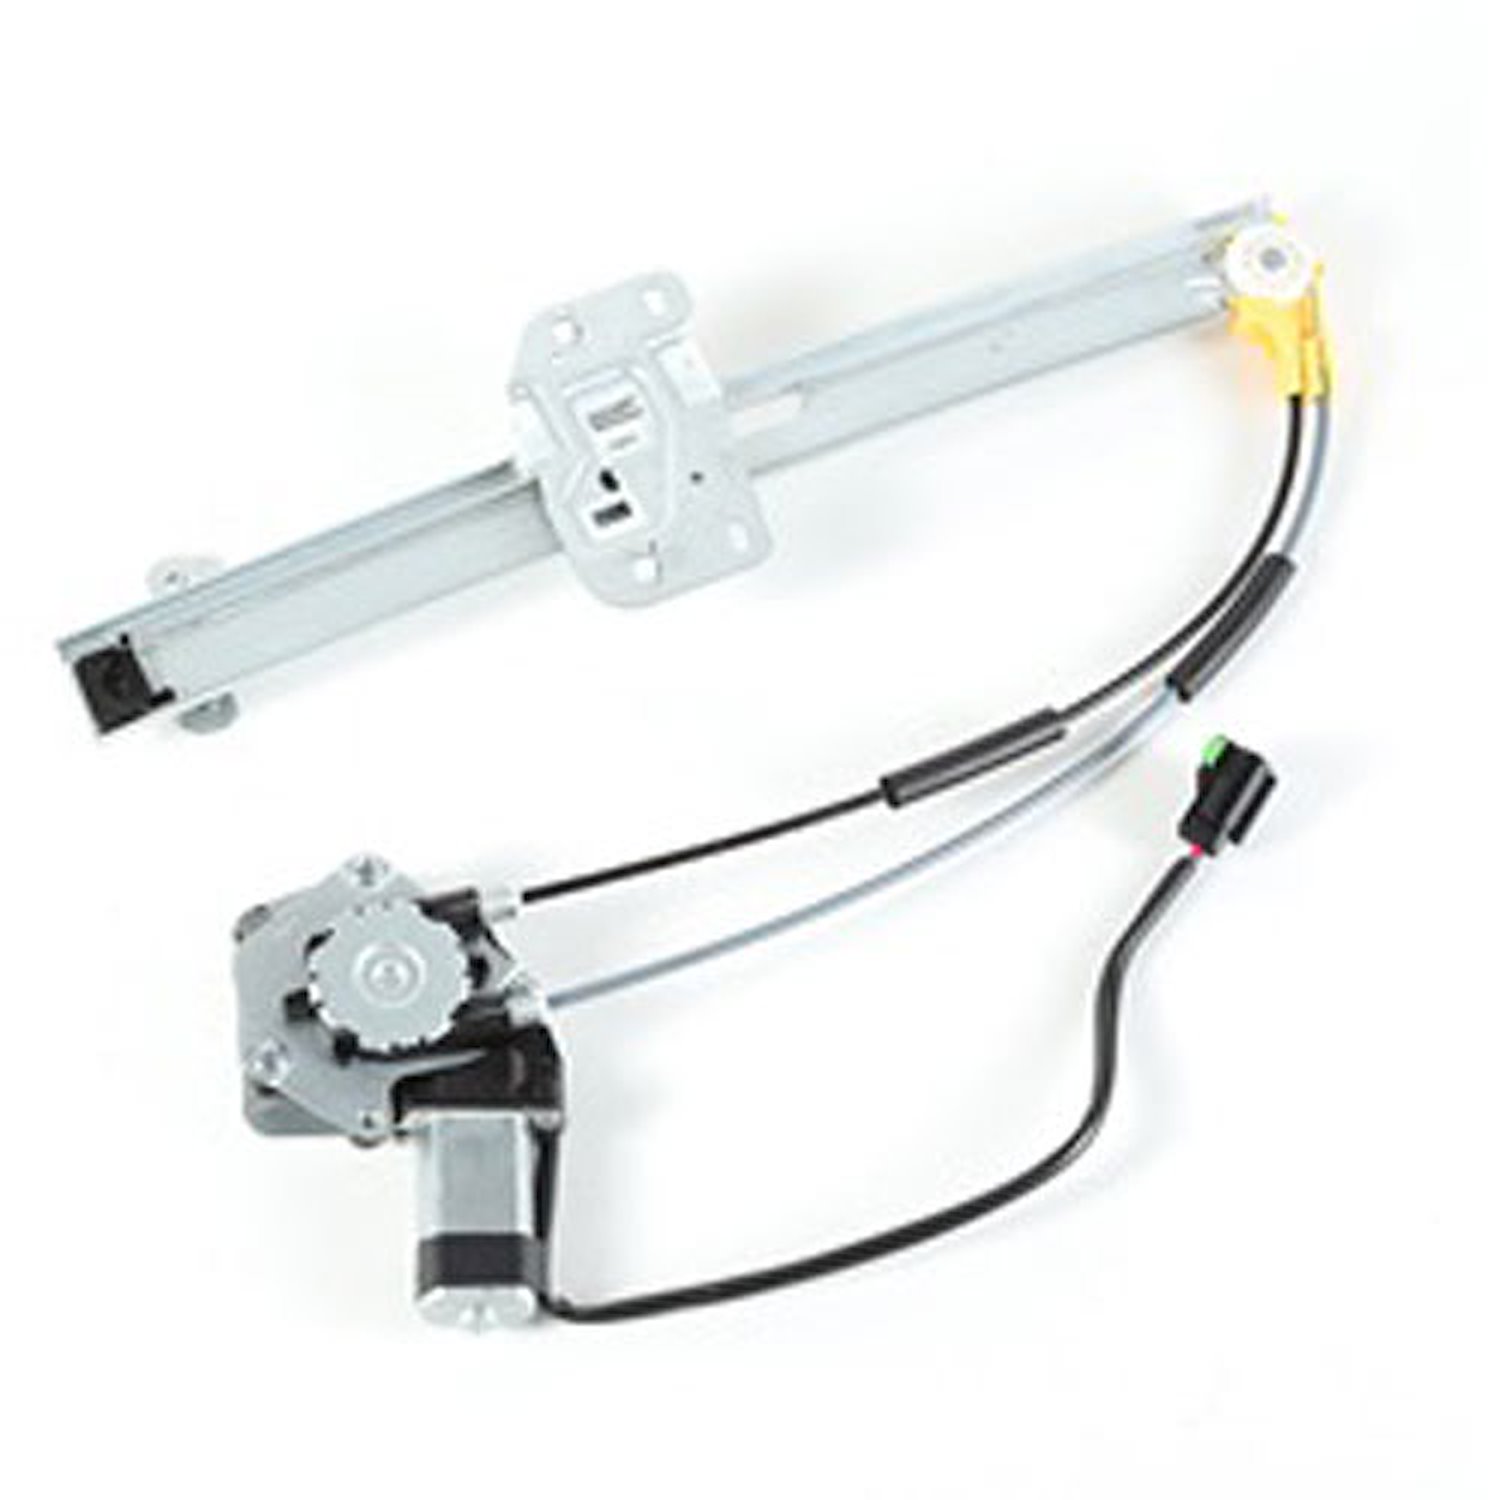 This right front power window regulator from Omix-ADA fits 97-01 Jeep Cherokees.